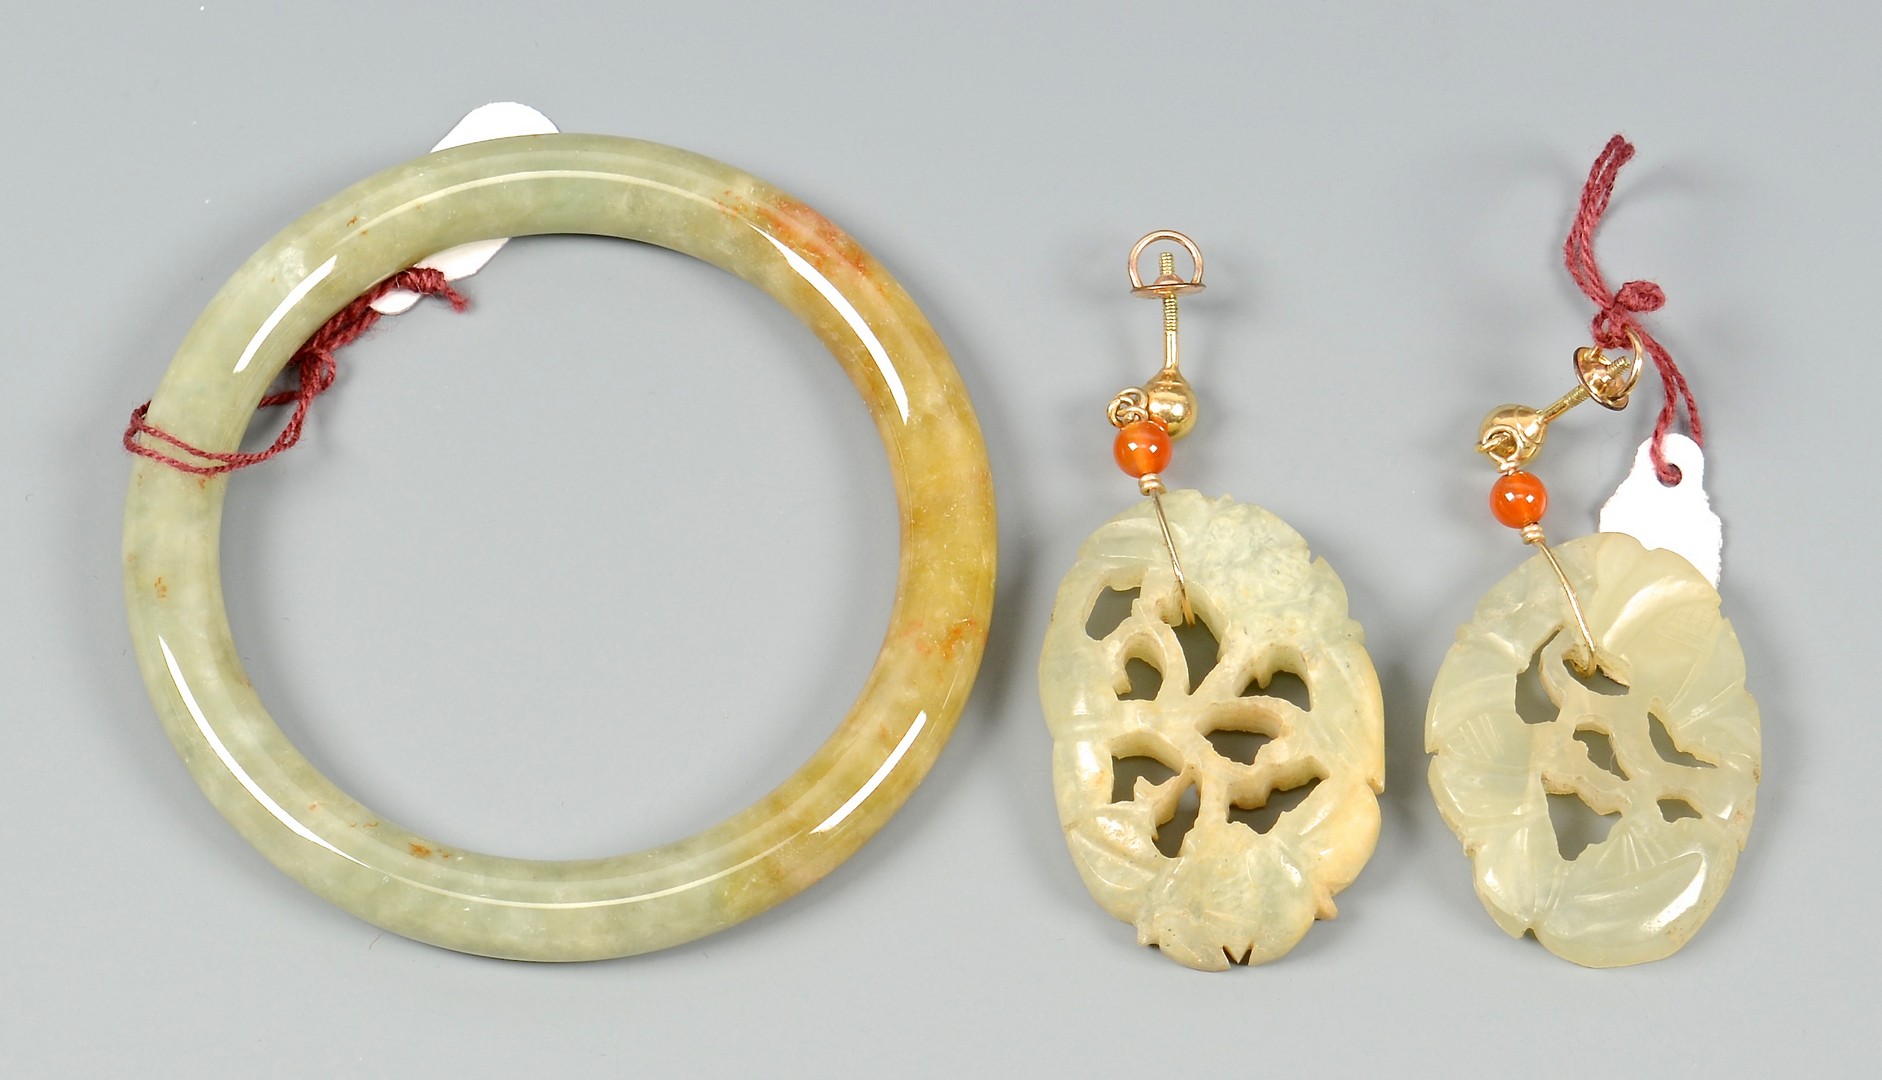 Lot 407: Asian jewelry, 3 necklaces, Earrings, and Bracelet